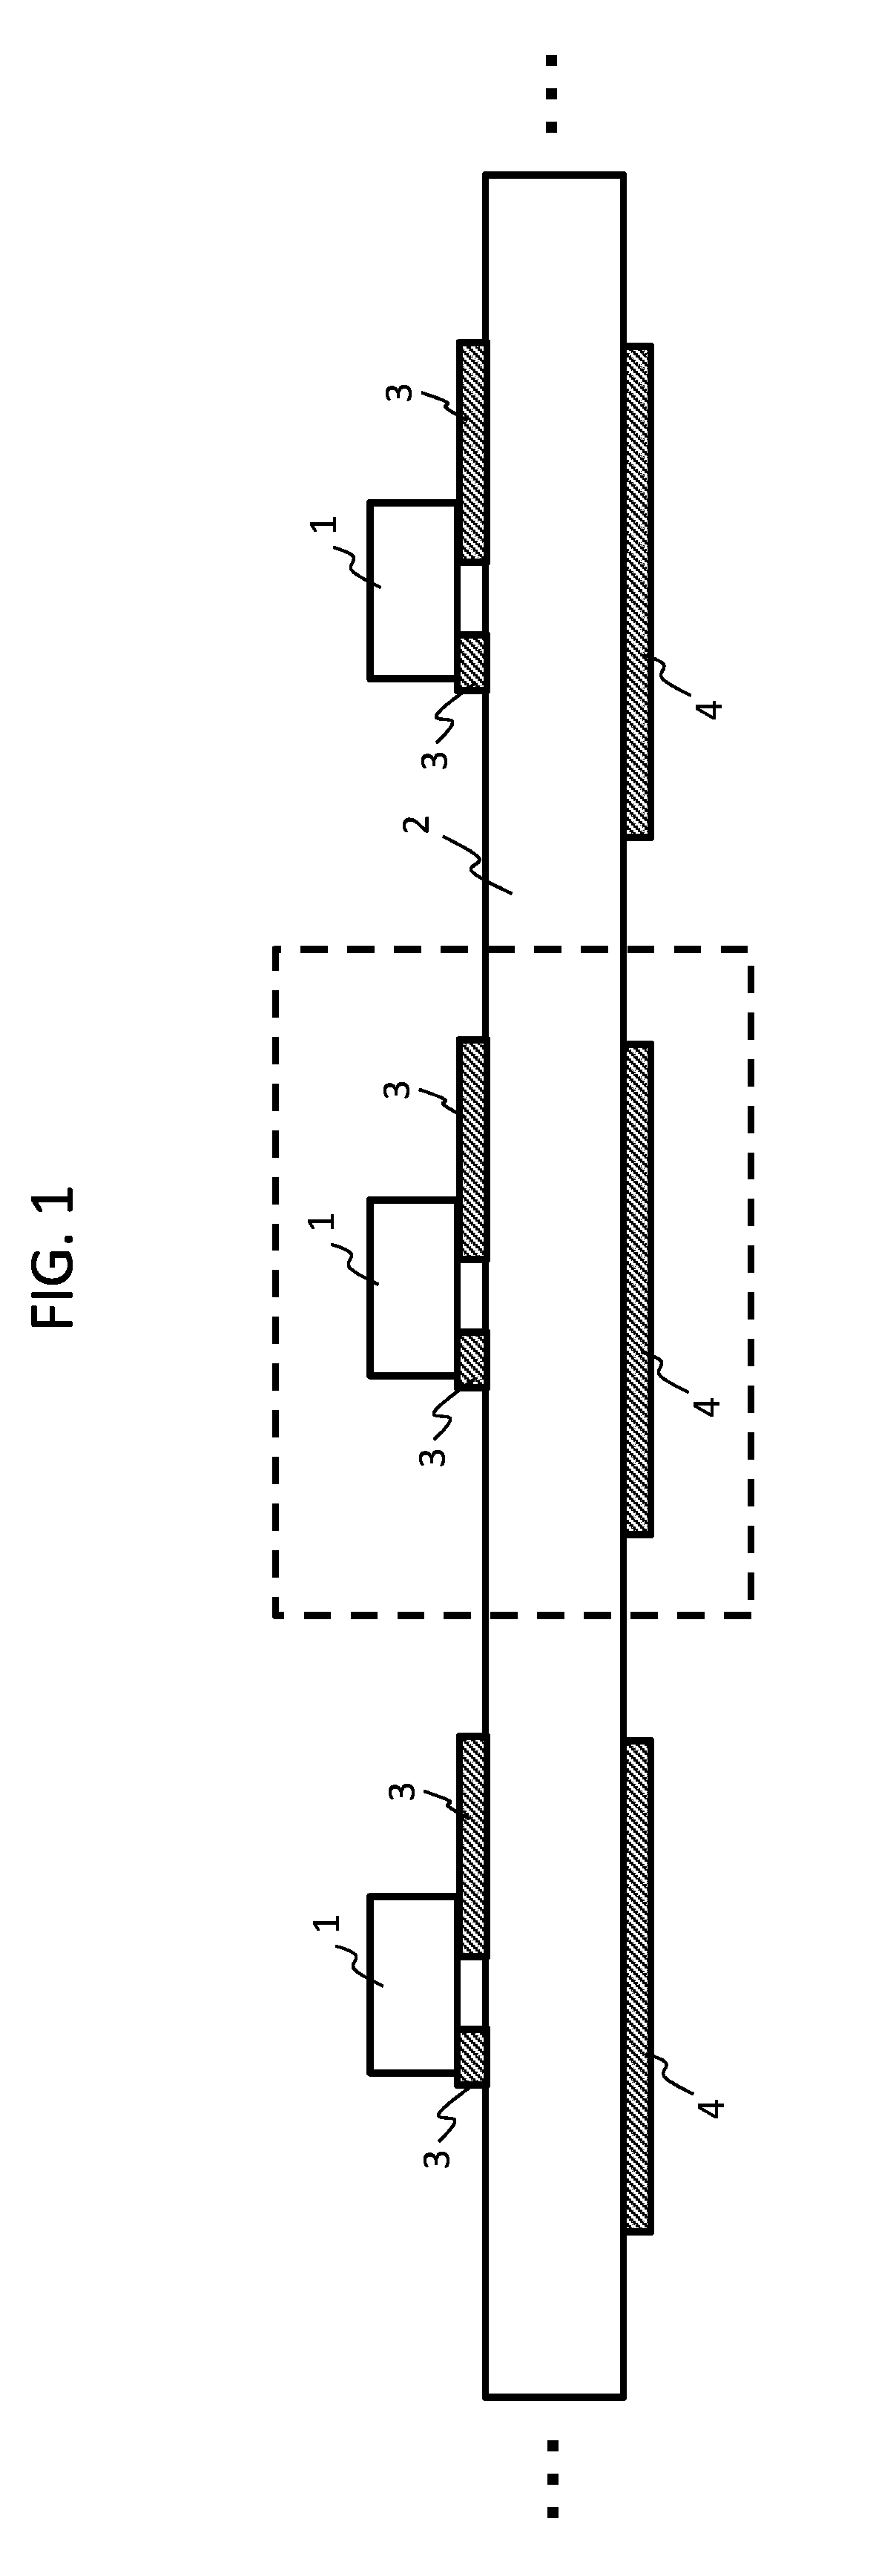 Optically transparent plate with light emitting function and method of producing the same